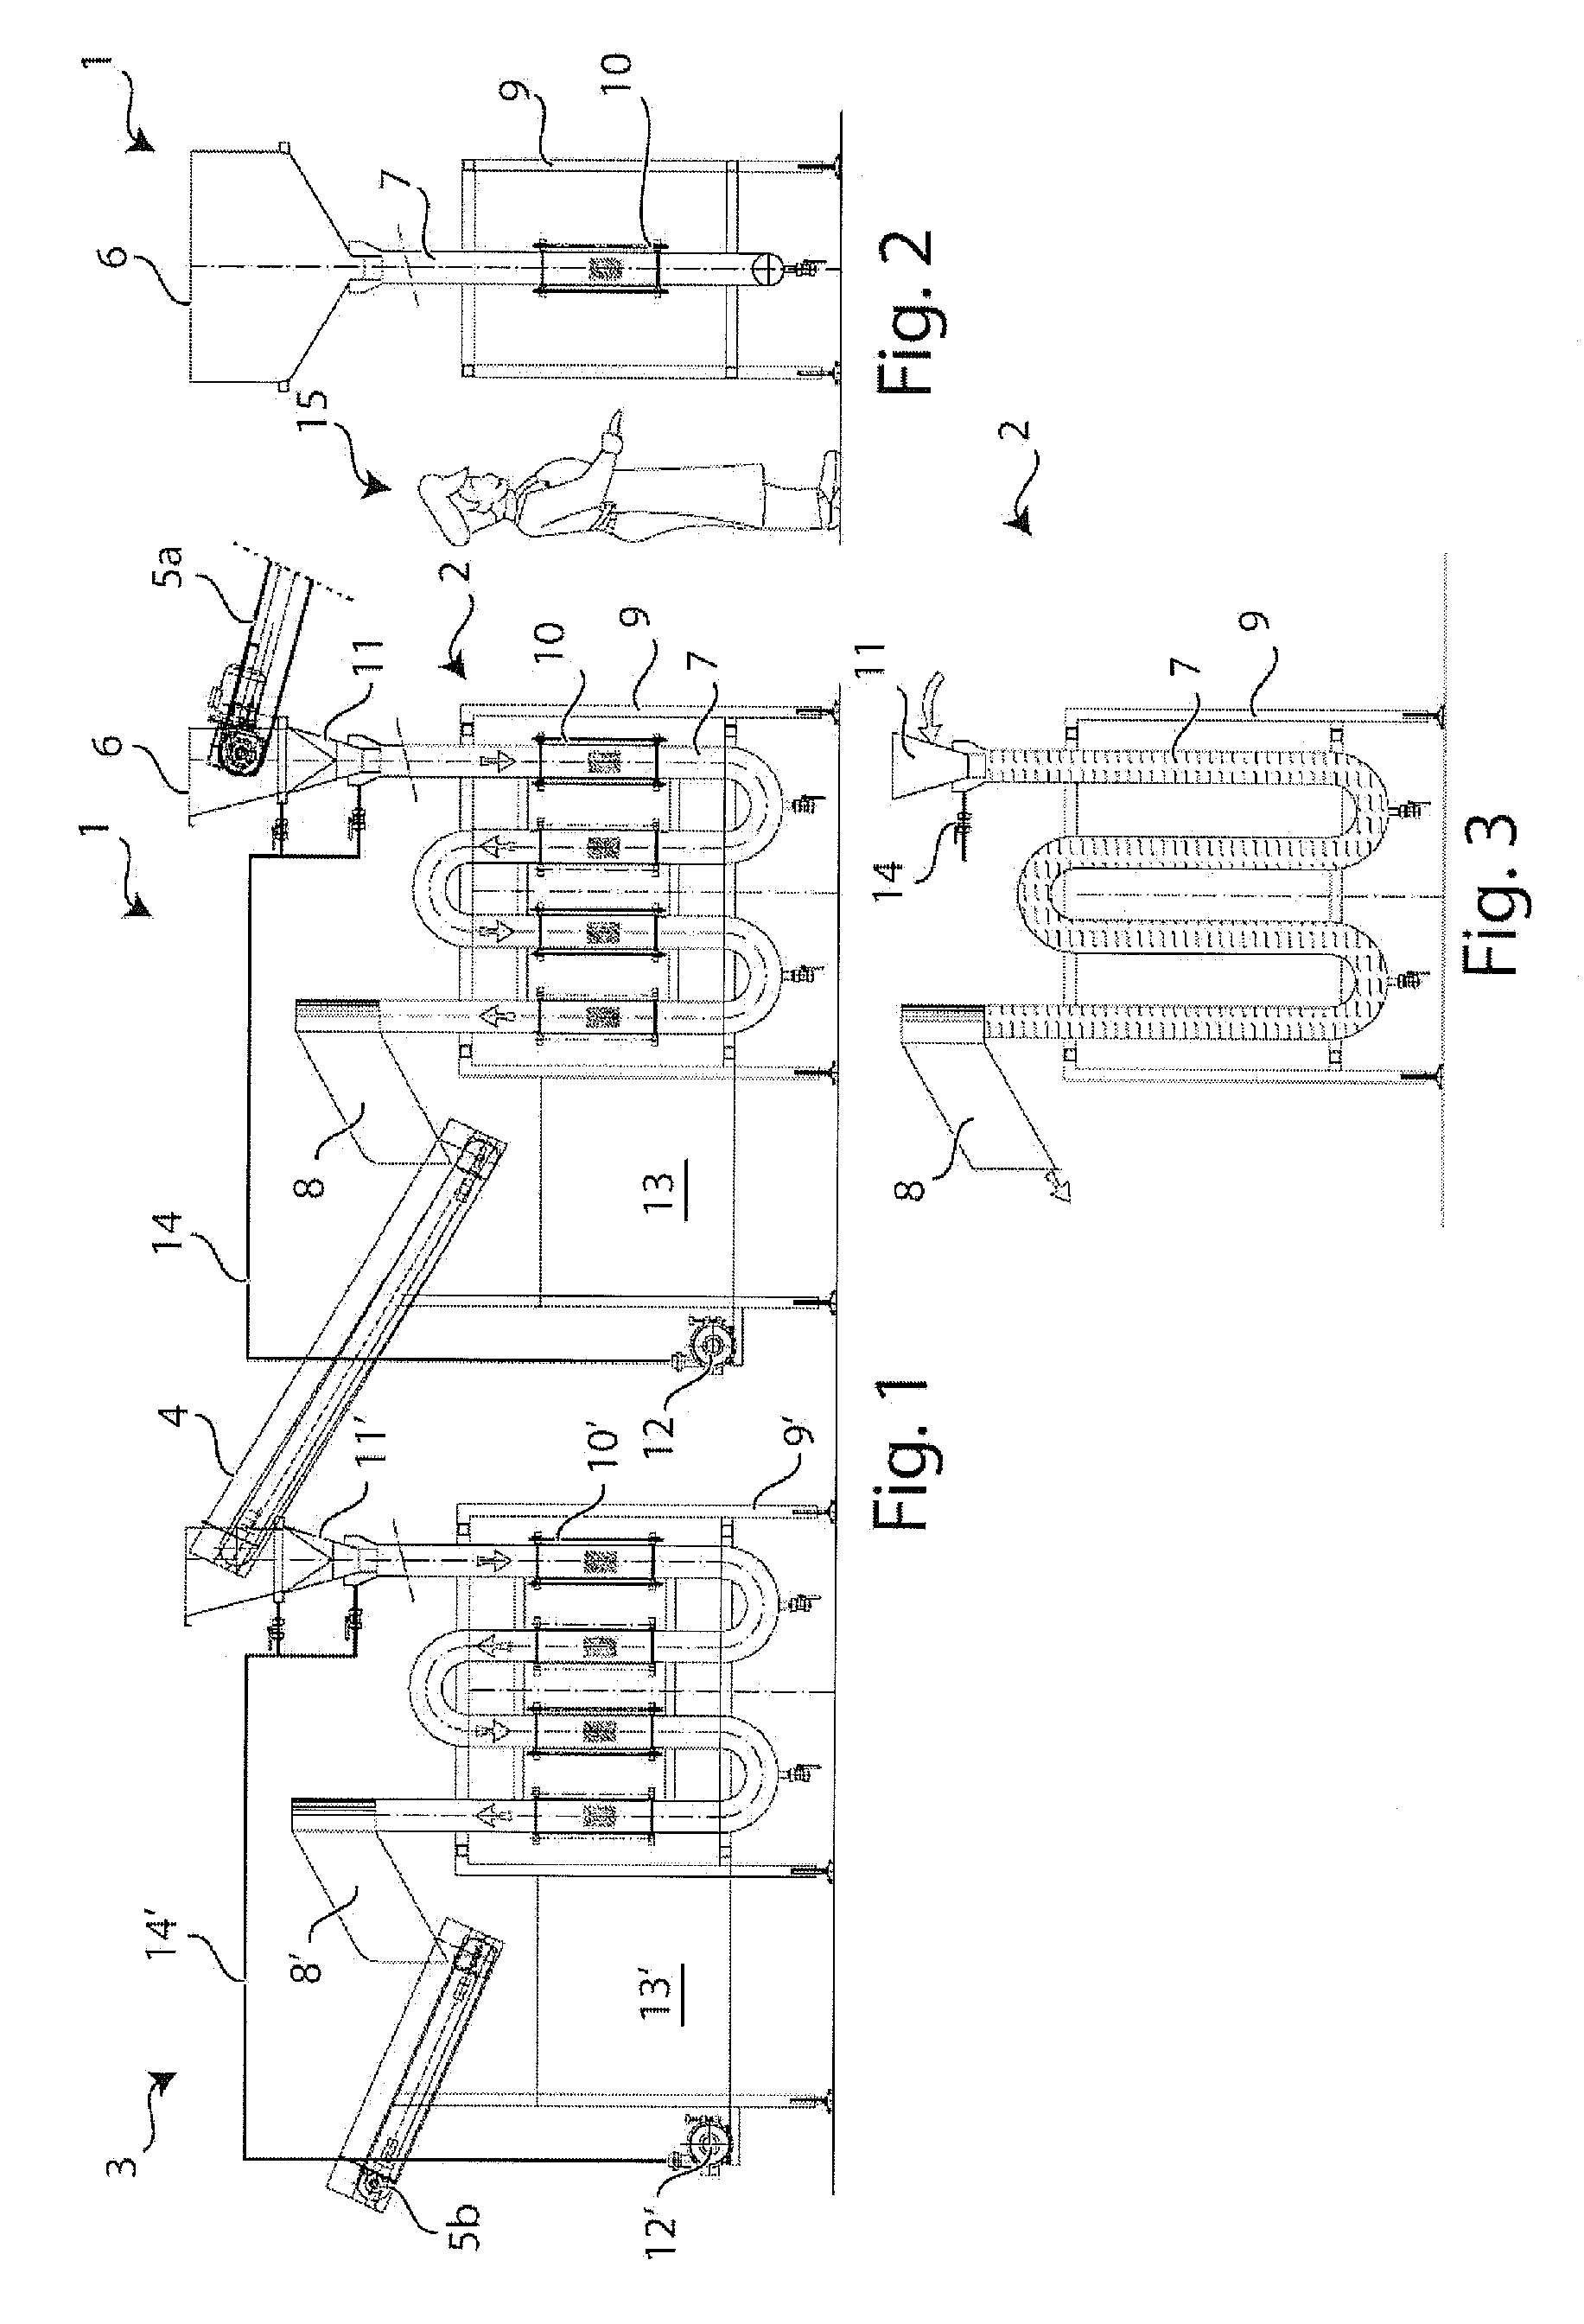 System for transporting and/or washing and/or pasteurisation thermal treatment of foodstuffs, particularly leaf products